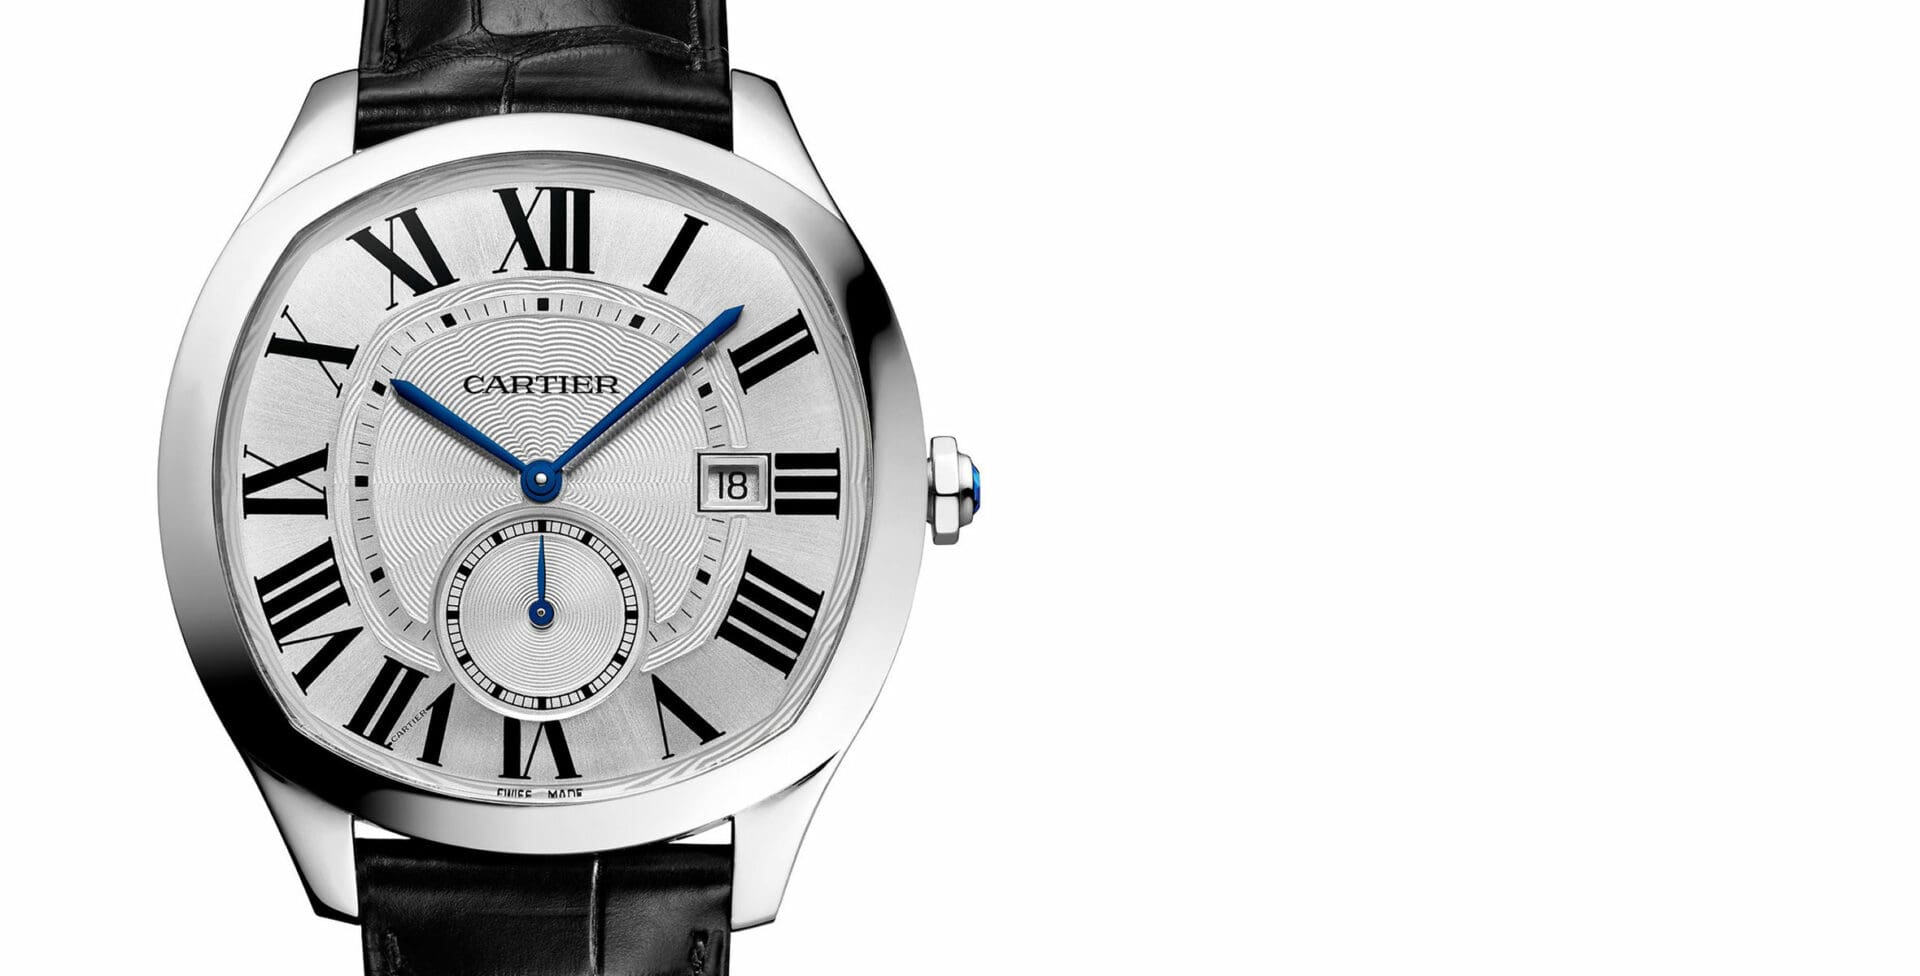 GONE IN 60 SECONDS: We take the Cartier Drive de Cartier in steel for a test drive